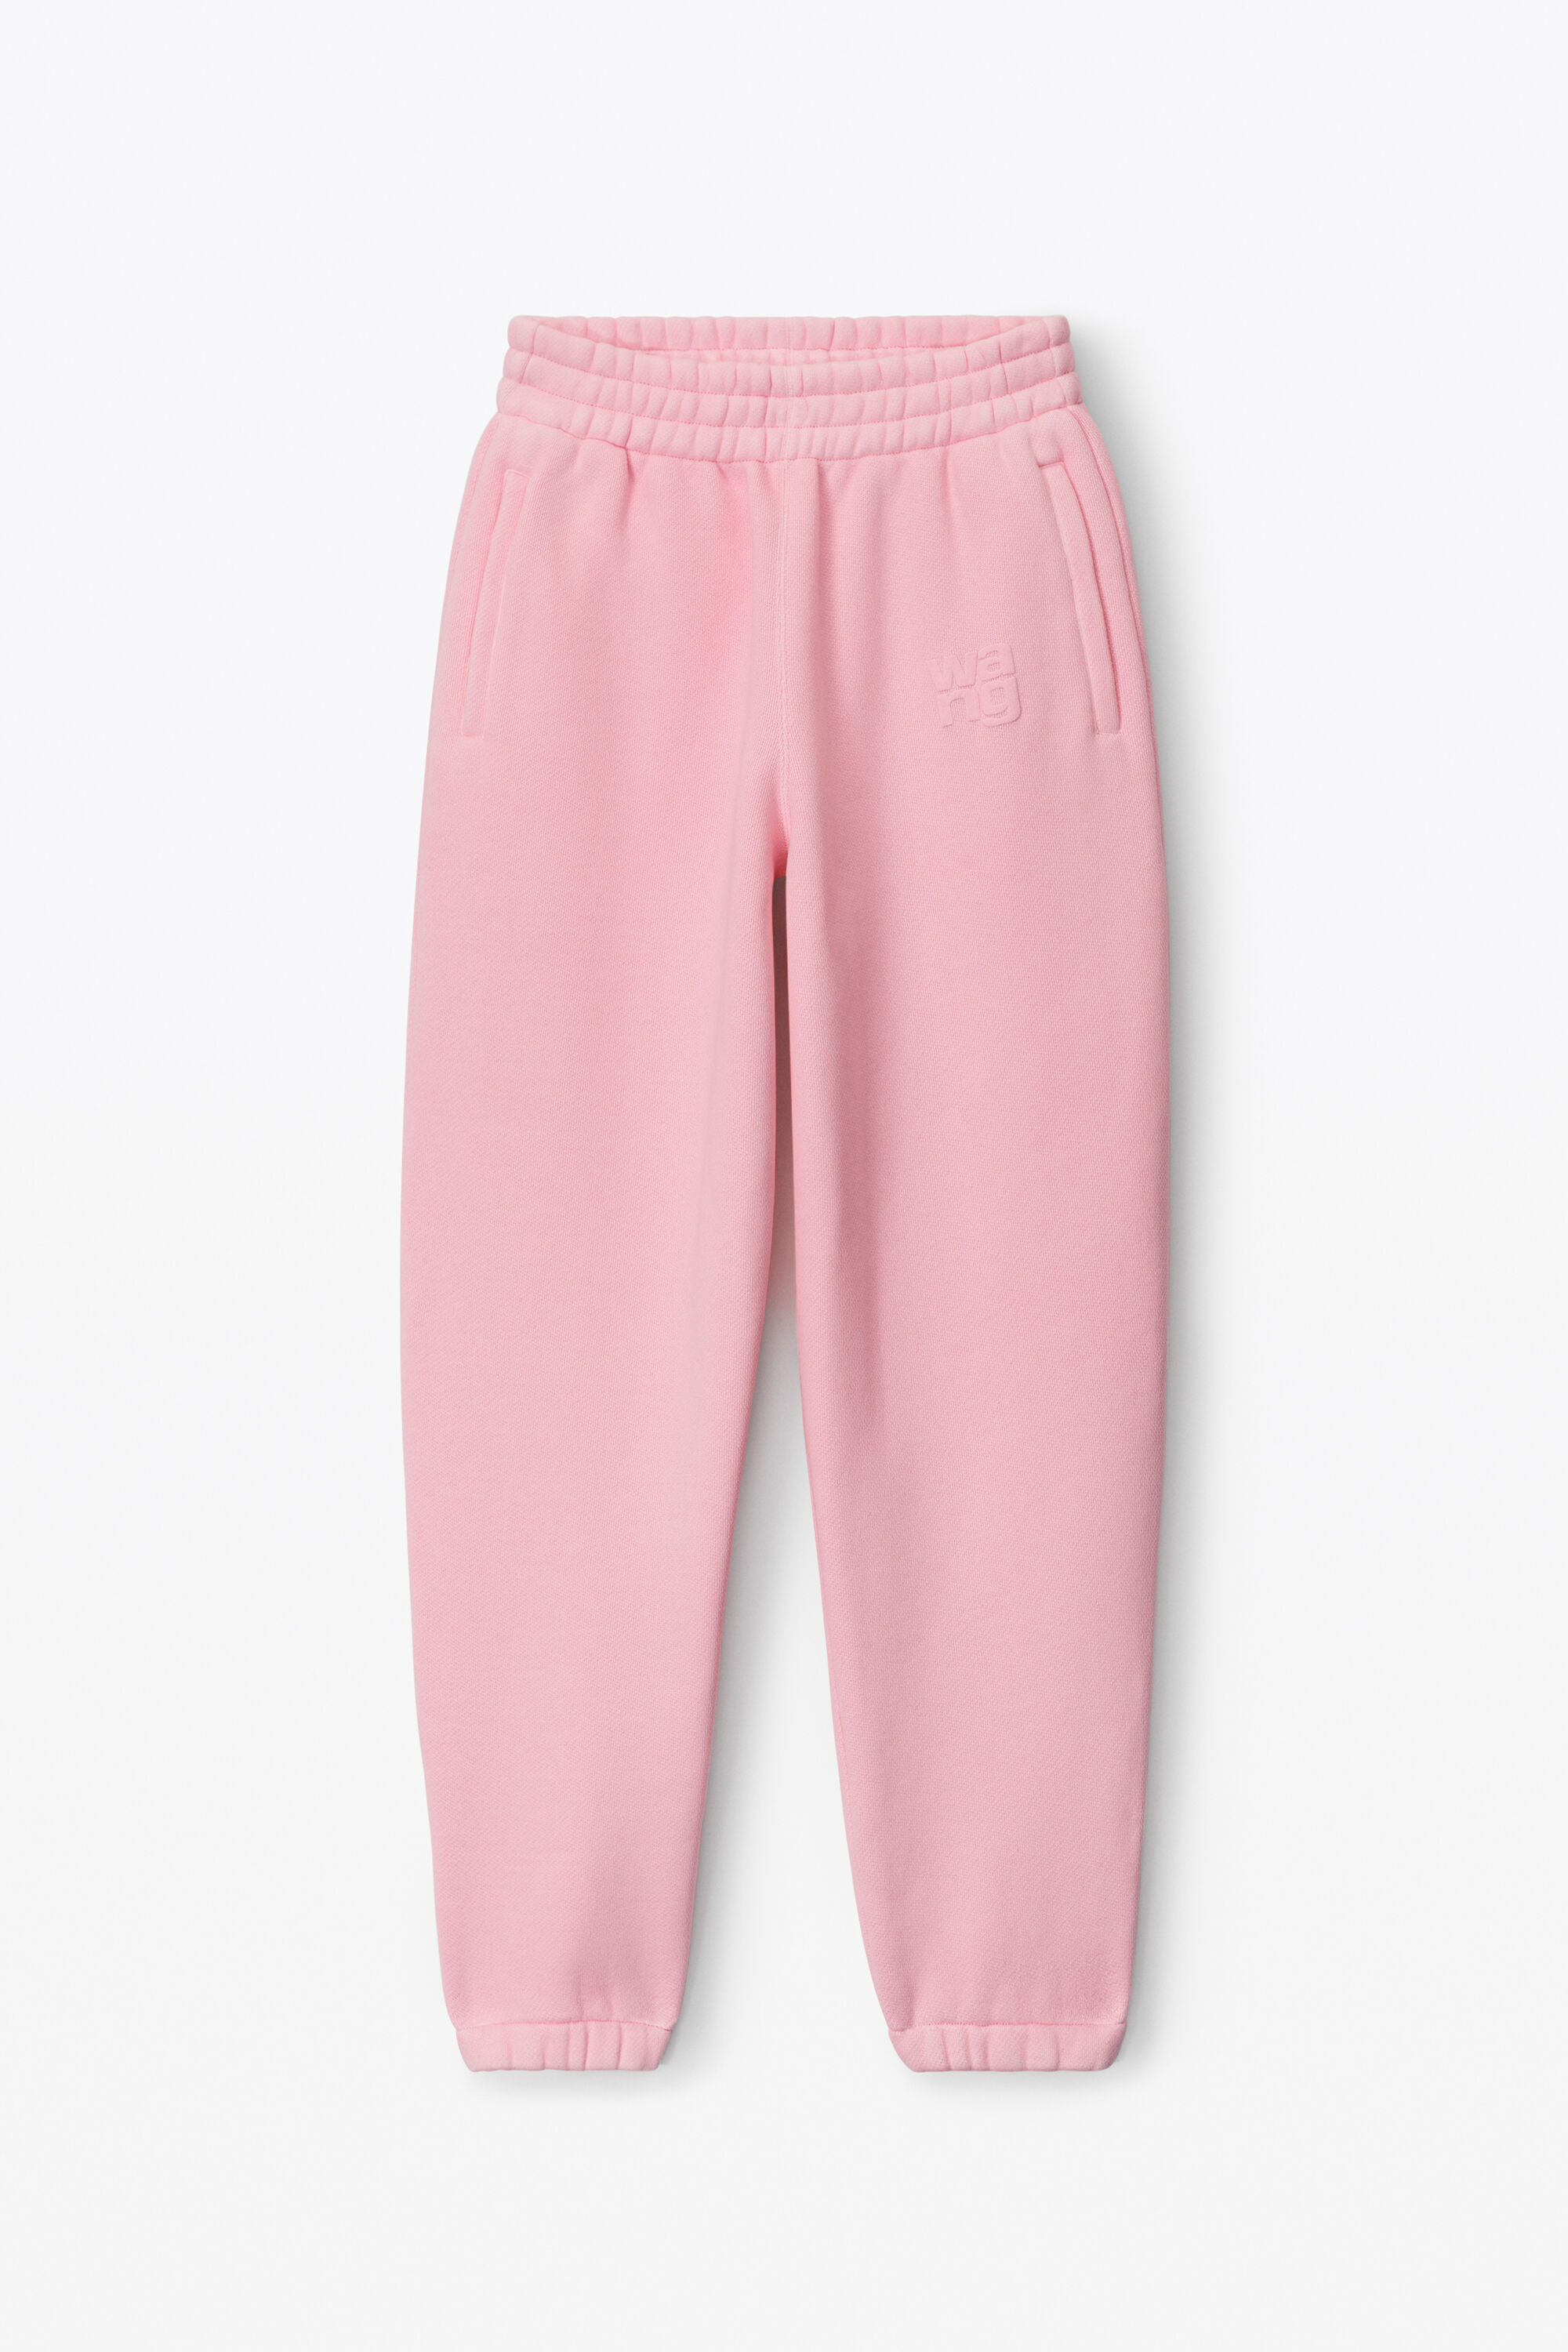 alexanderwang puff logo sweatpants in terry SOFT CANDY PINK 